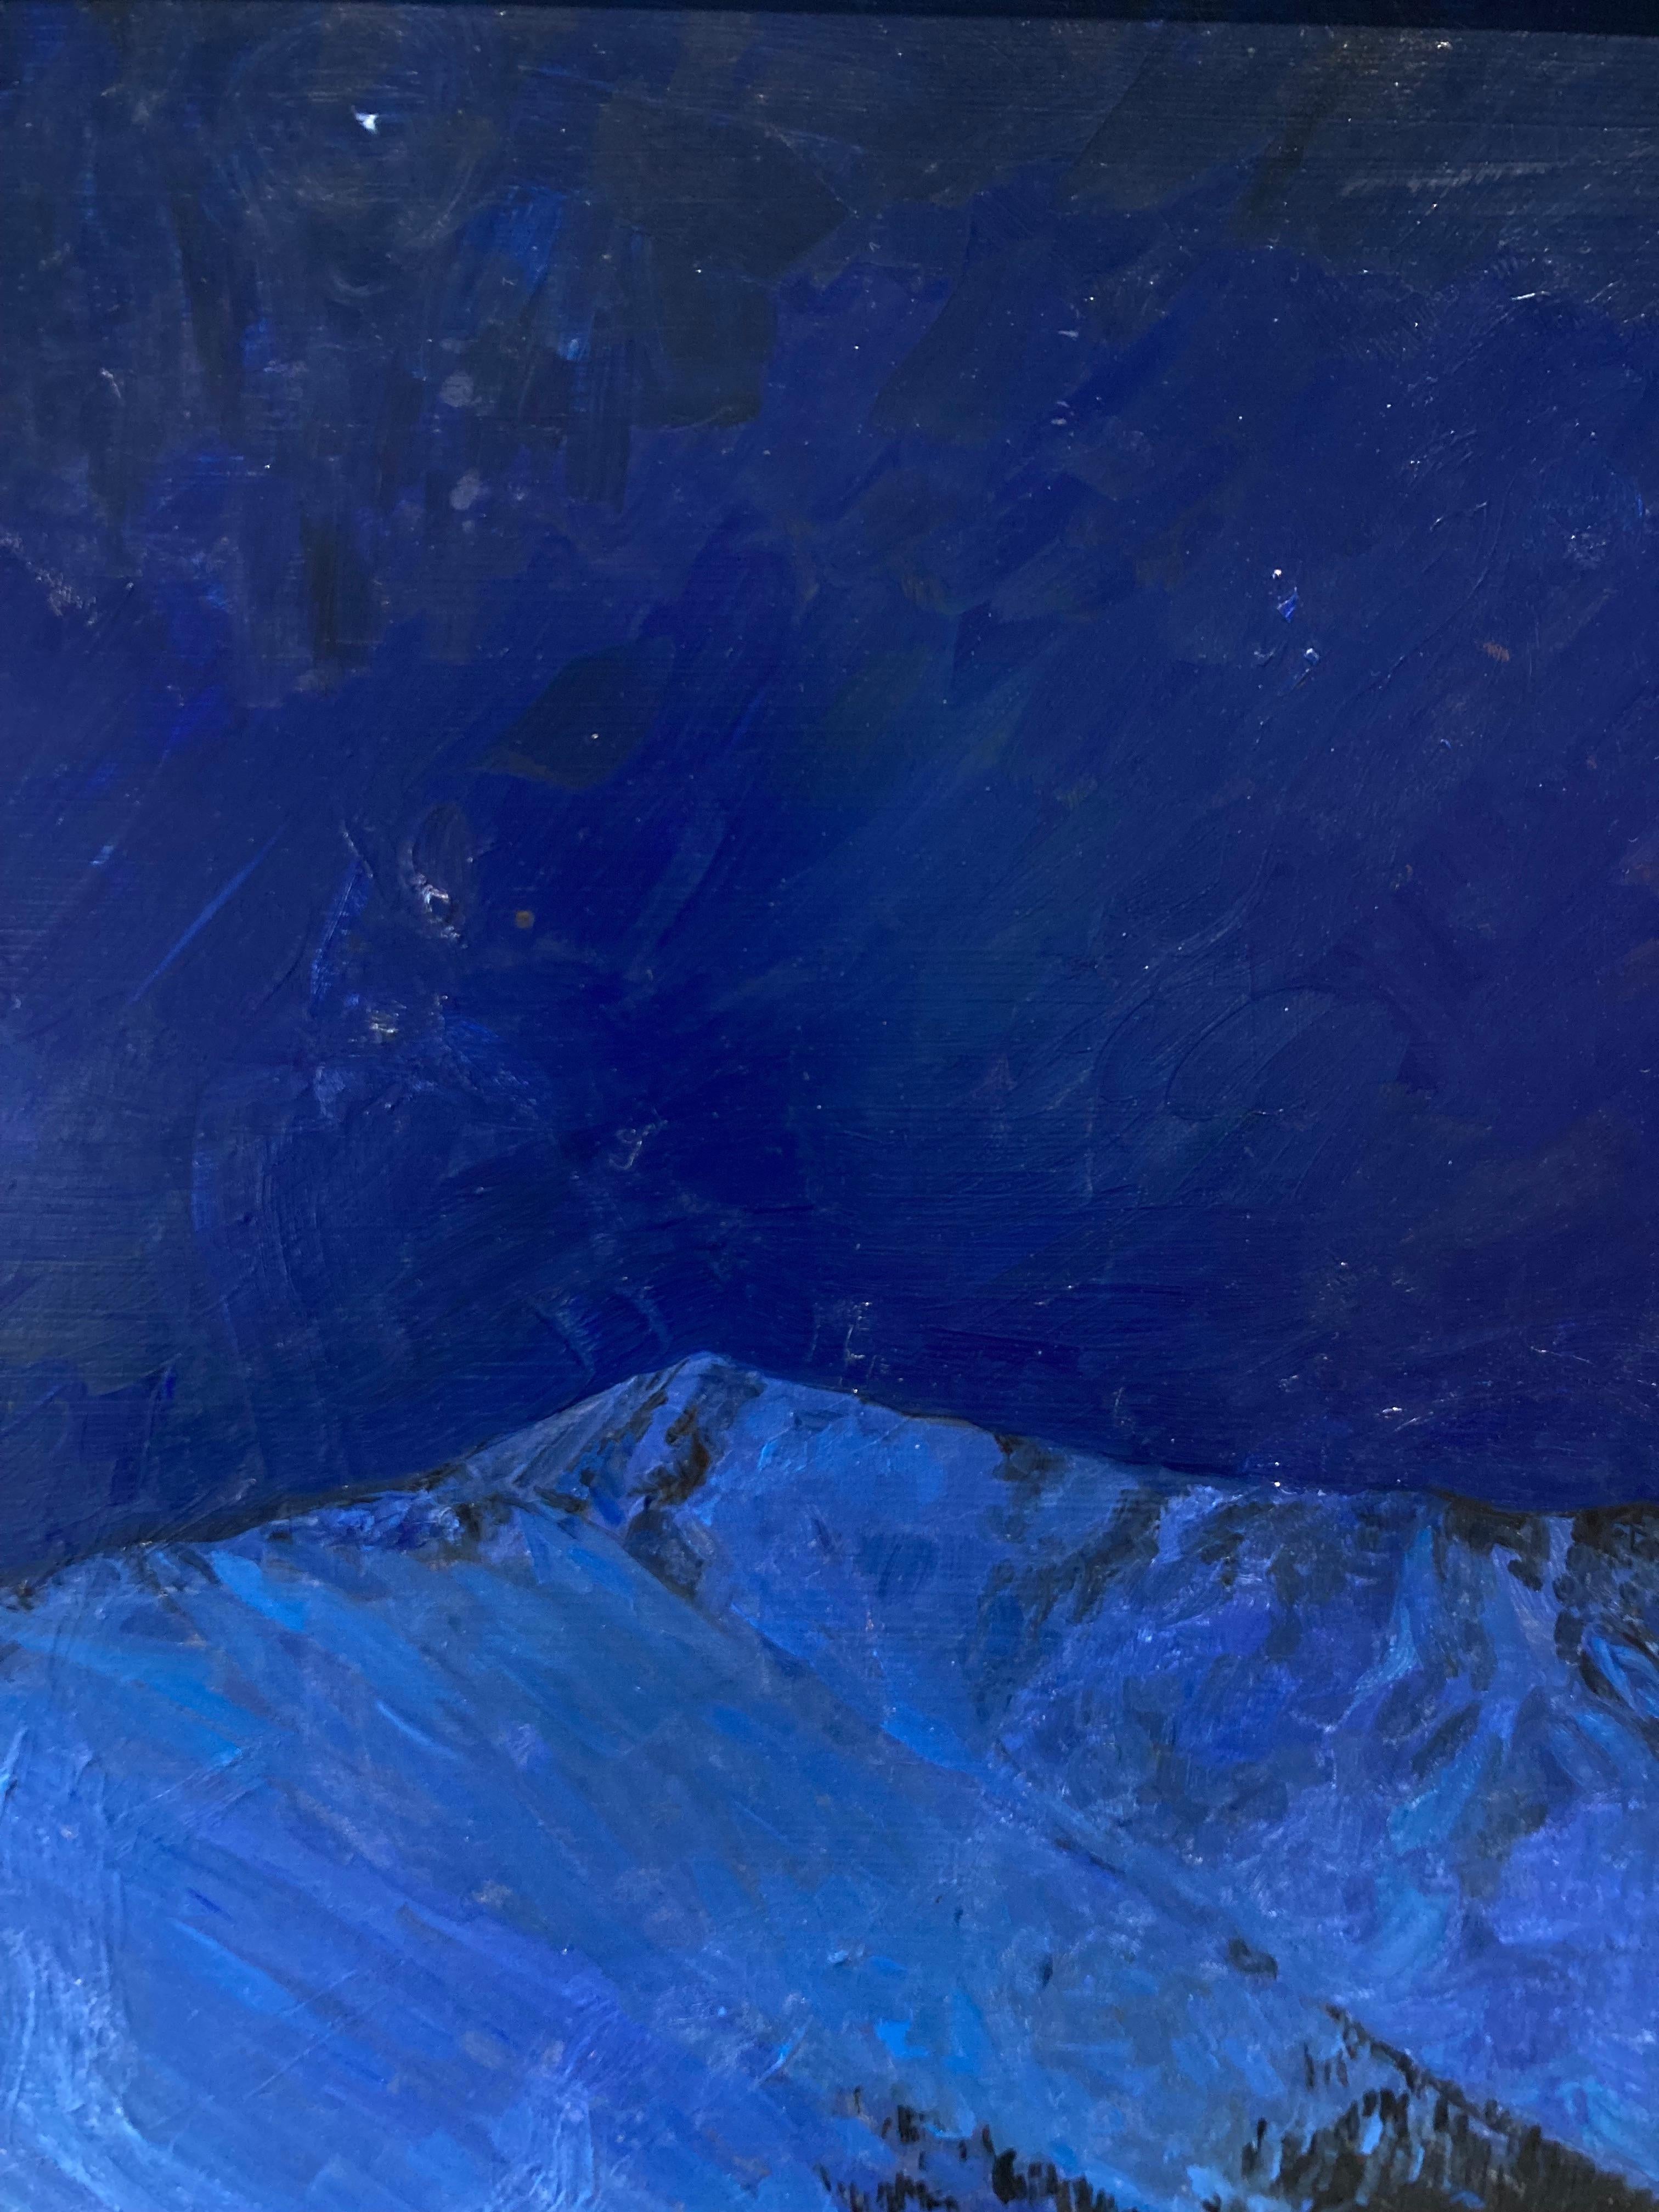 An oil painting of a snowy pass in the mountains. At first glance the subject matter may come across as abstract shapes until the viewer sees that the darker central shape is trees growing down the side of a valley pass between a snowy hillside in